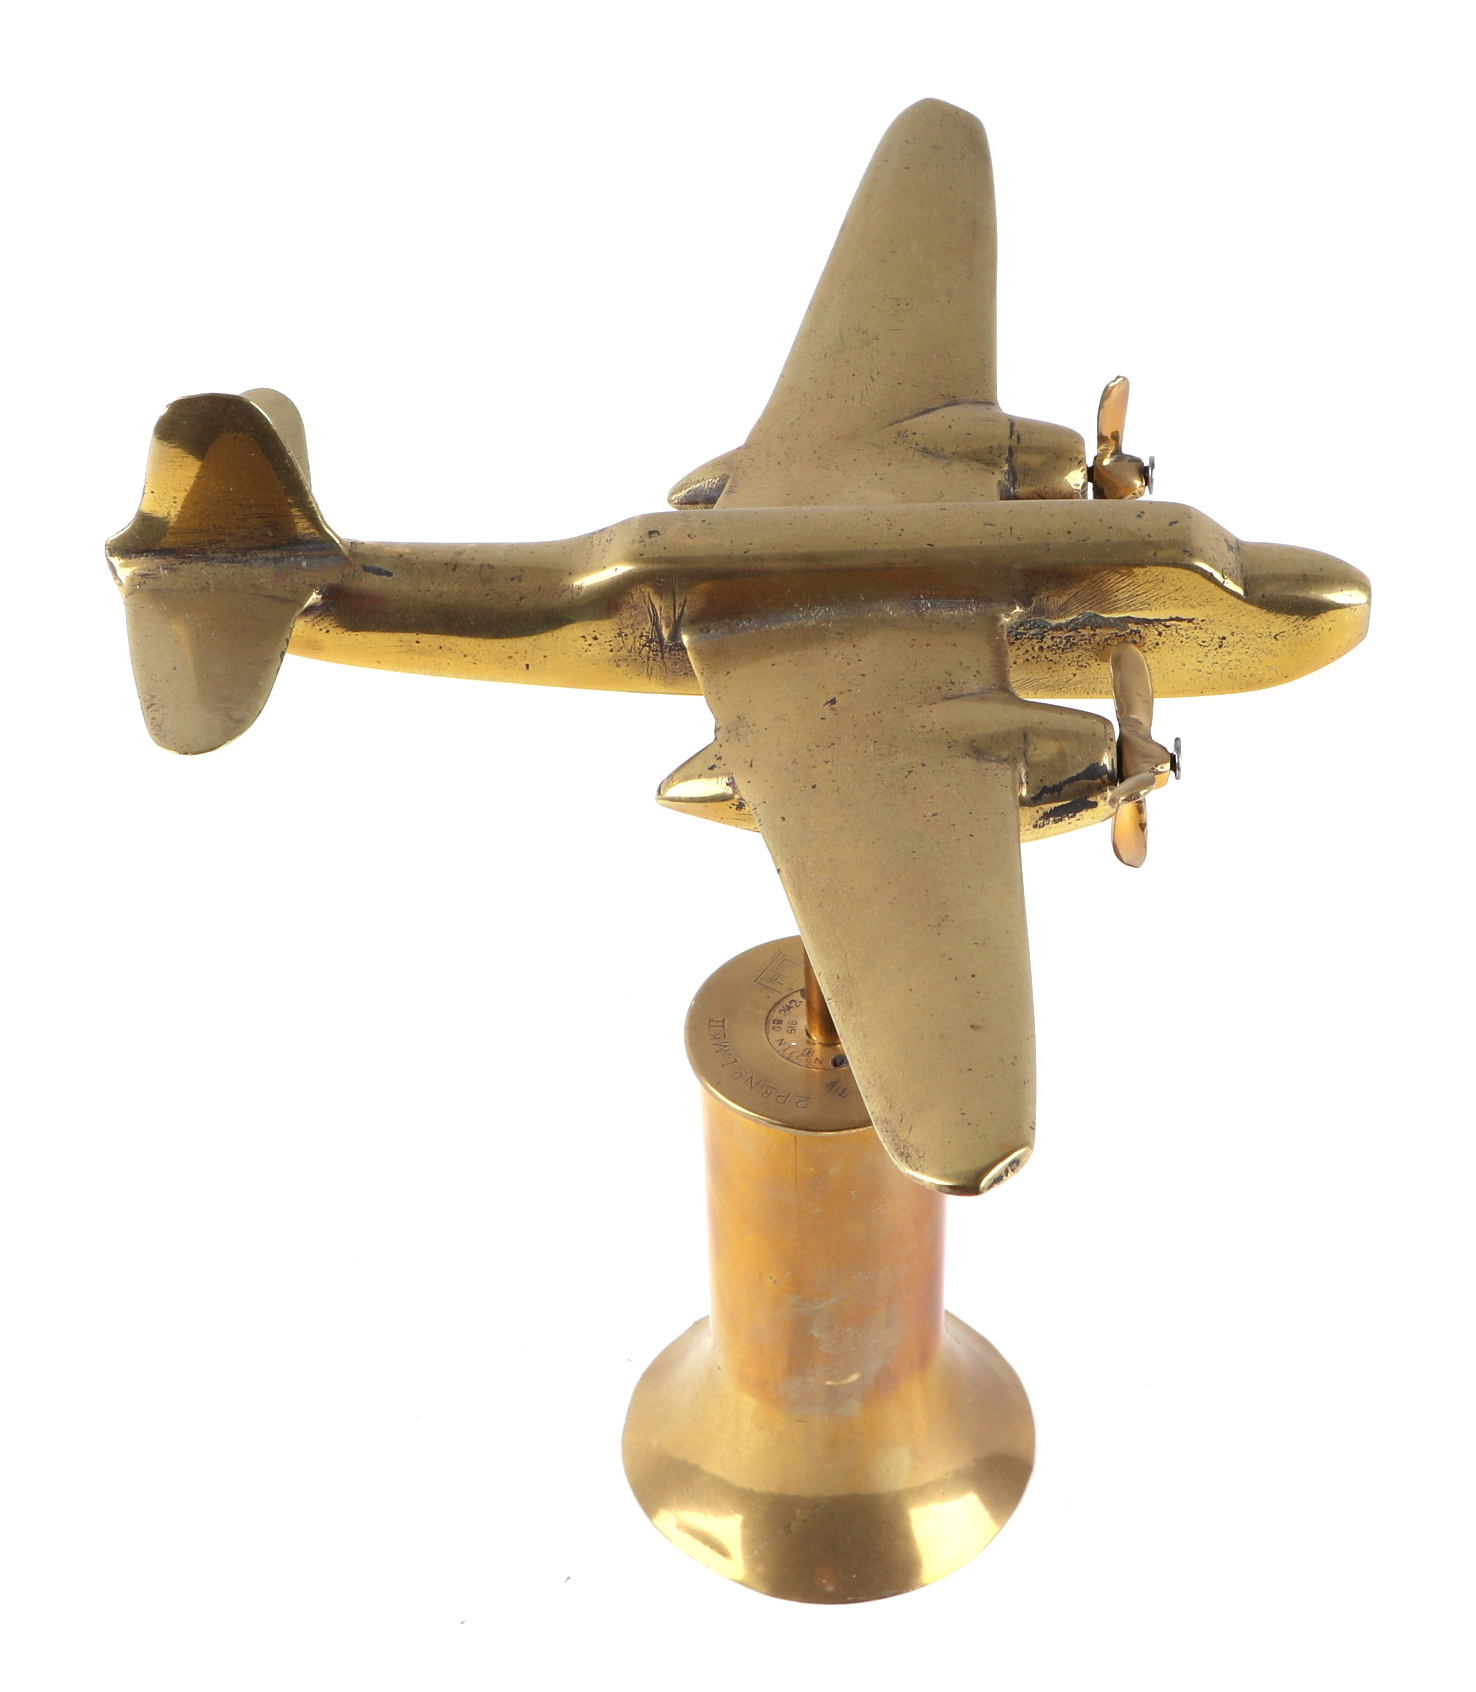 A trench art cast brass model of twin engine aircraft, mounted on a brass plinth, wingspan 26cm. - Image 2 of 2